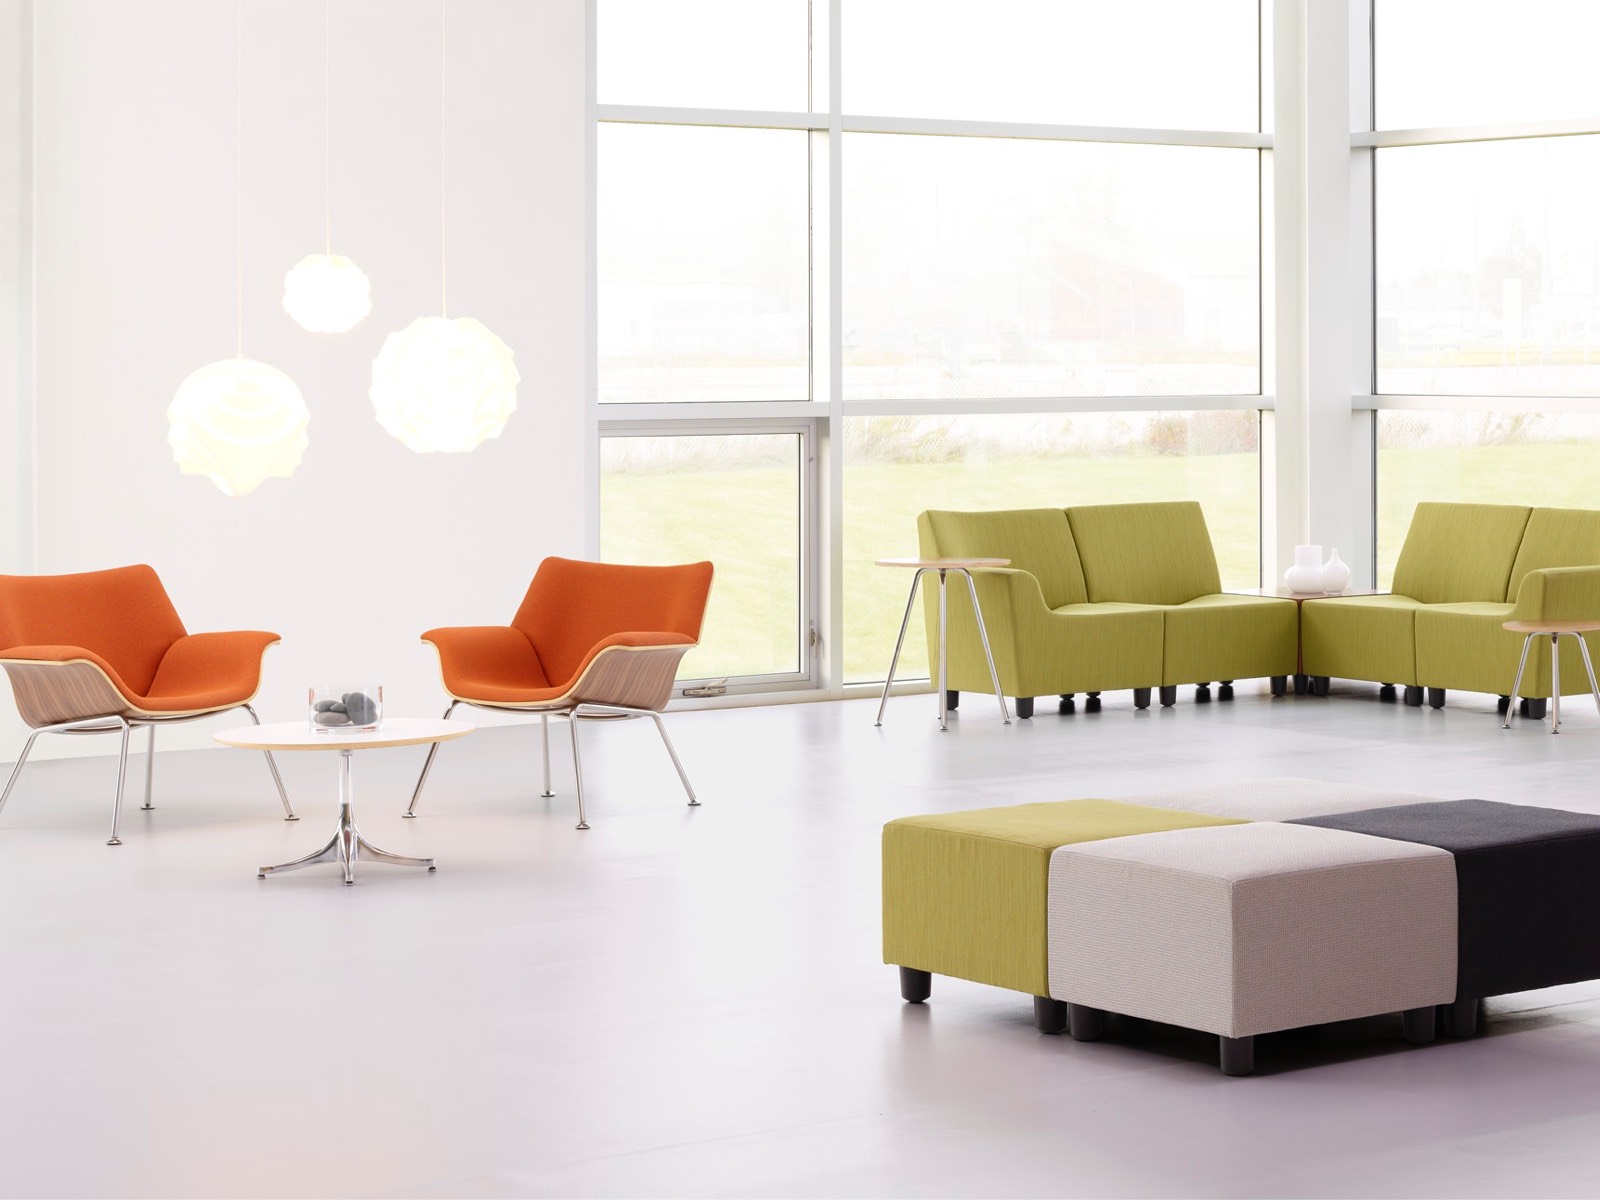 Orange Swoop lounge chairs and green Swoop modular seating in a casual gathering space.